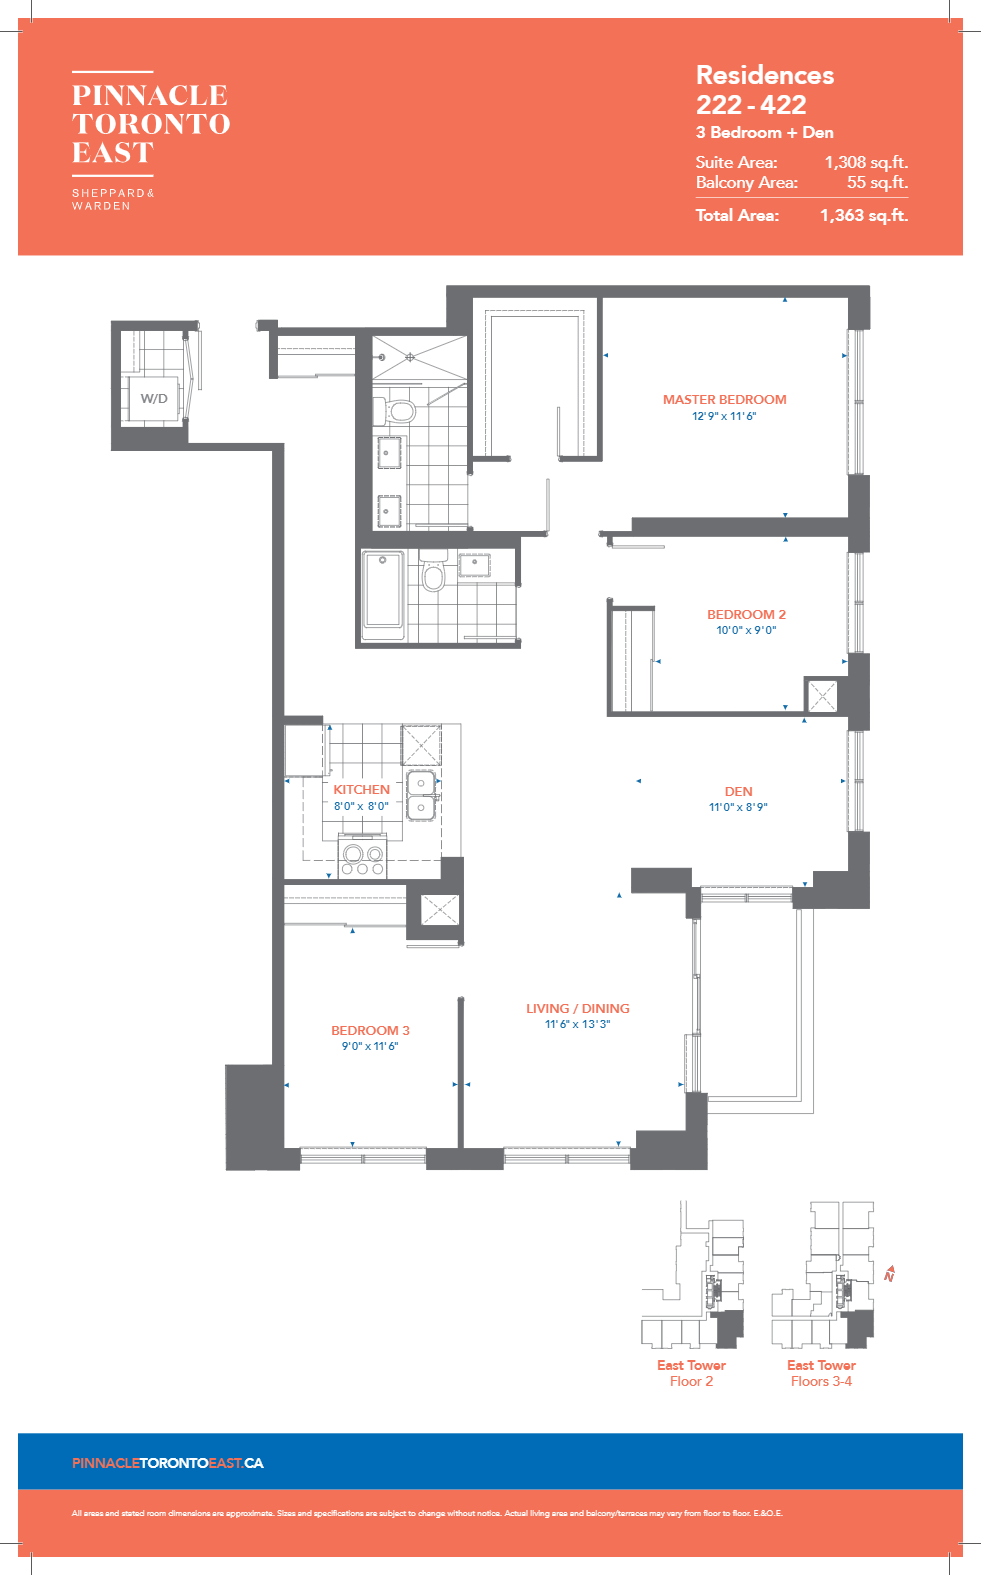 Residences 222-422 Floor Plan of Pinnacle Toronto East Condos with undefined beds